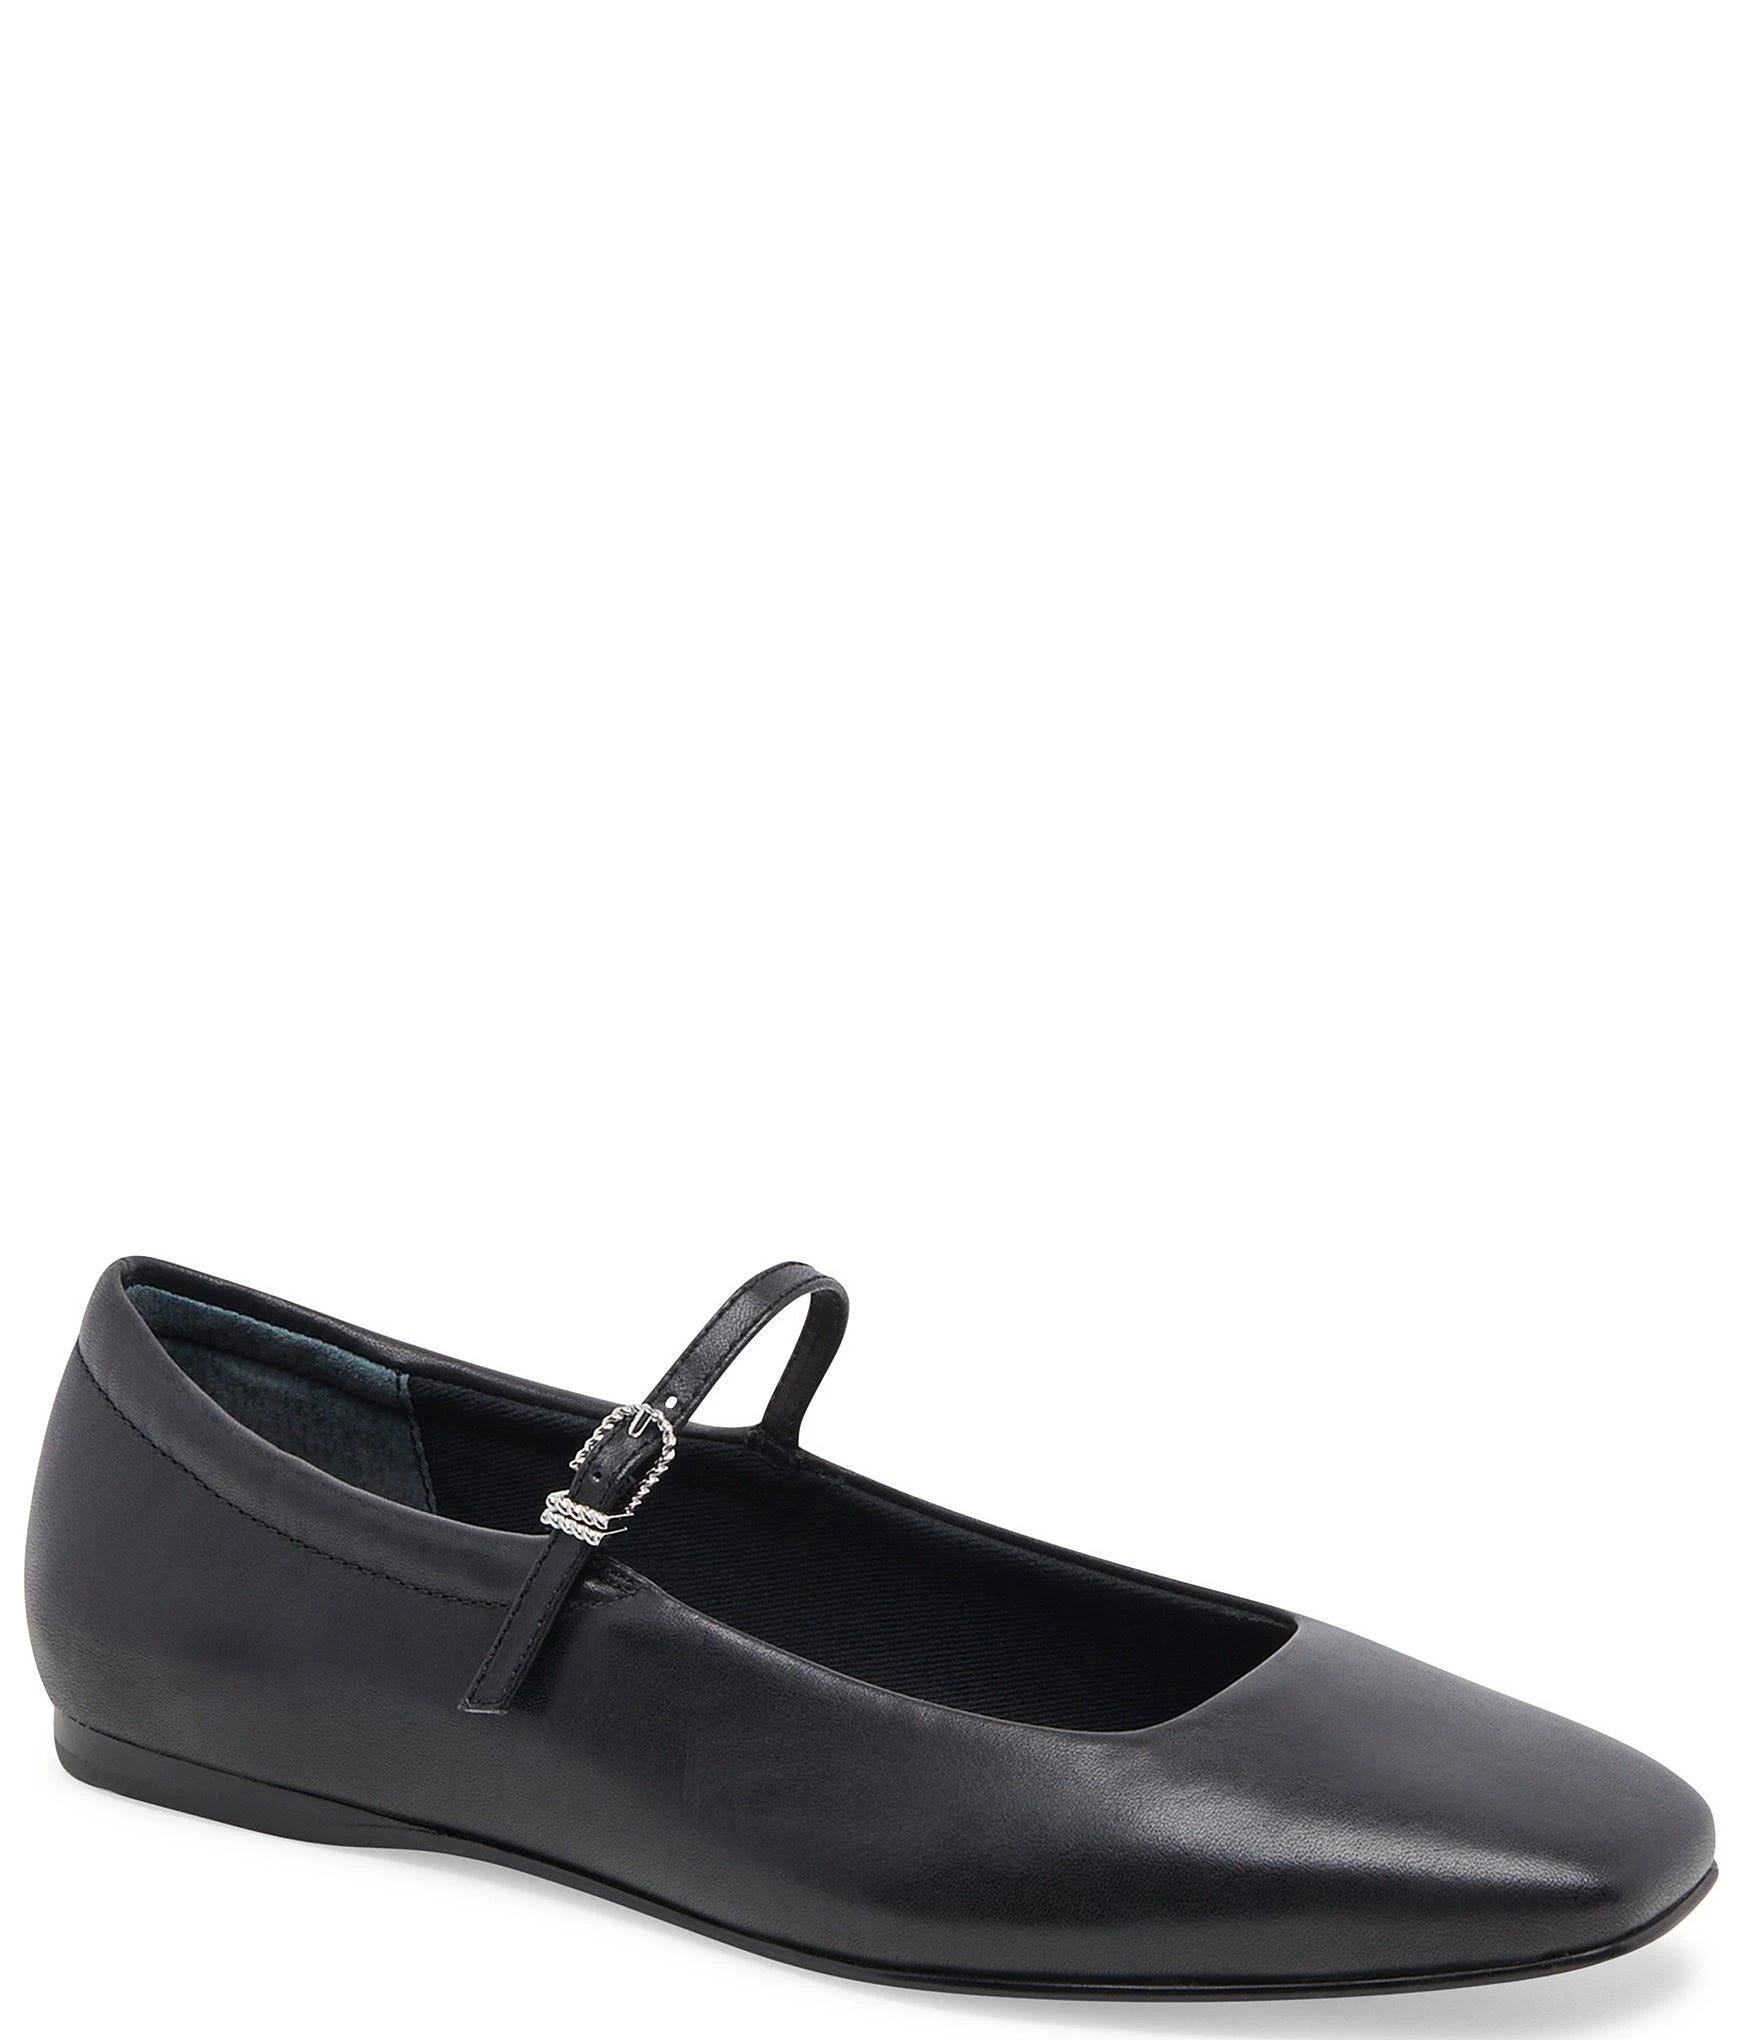 Dolce Vita Reyes Ballet Flats in Black Leather: Stylish & Comfortable for Women Size 6.5 | Image